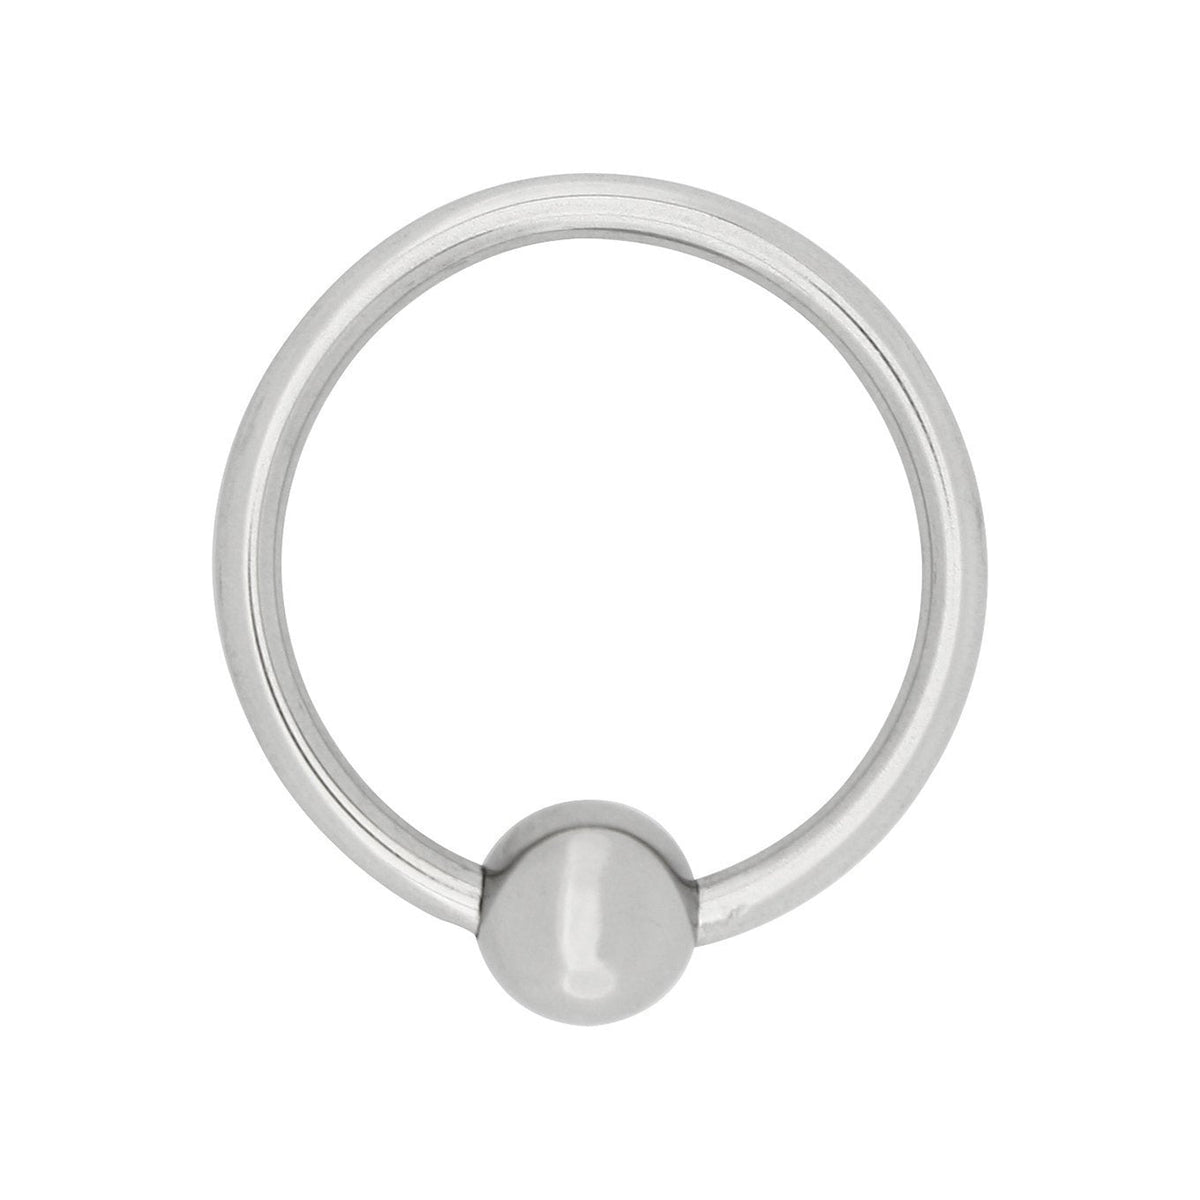 Steel Power Tools - Acorn Cock Ring 32mm -  Metal Cock Ring (Non Vibration)  Durio.sg